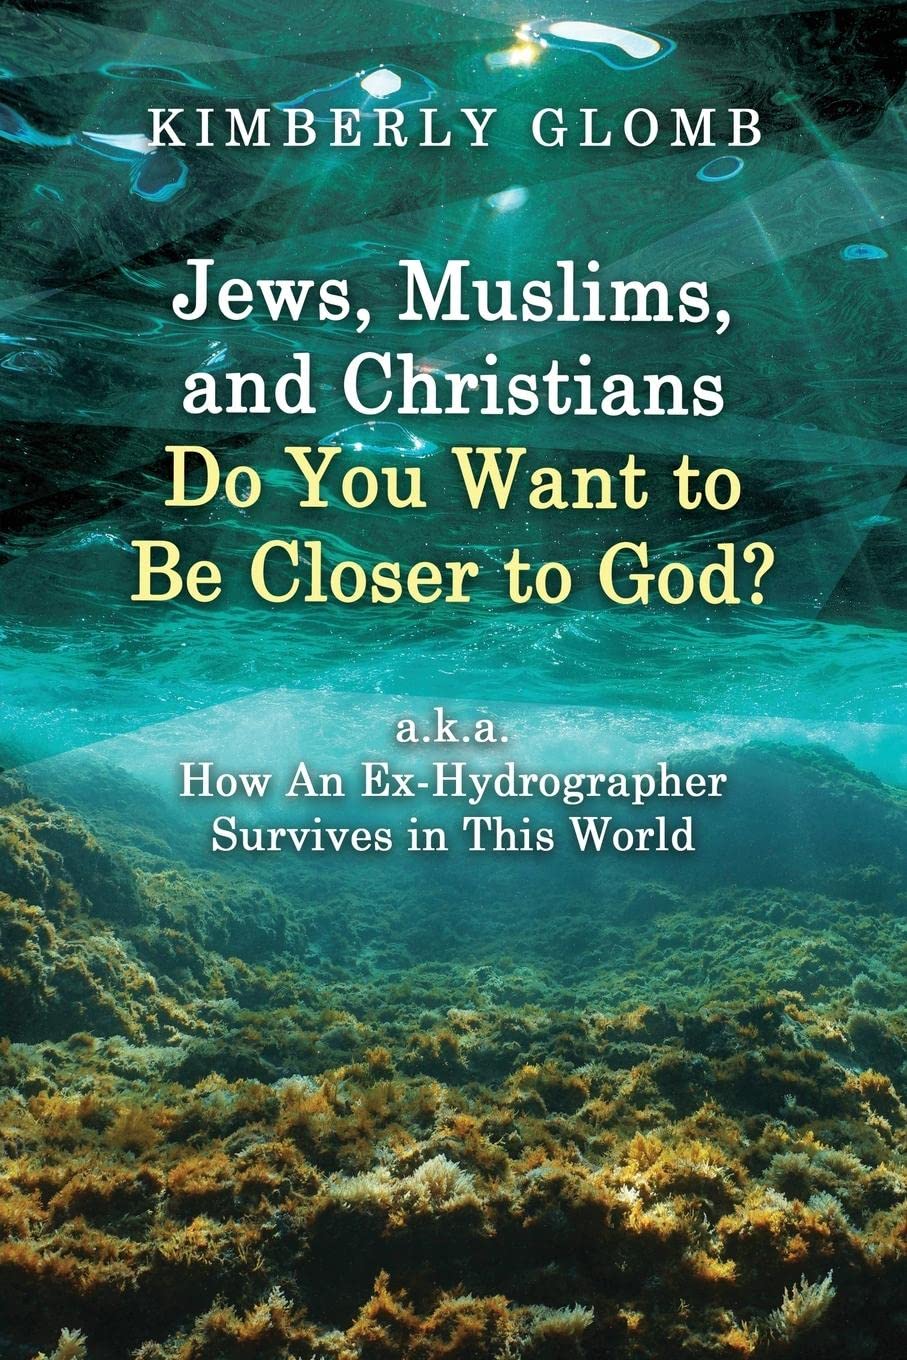 Author's Tranquility Press: Jews, Muslims, and Christians Do You Want to Be Closer to God? A.K.A. How an Ex-Hydrographer Survives in This World